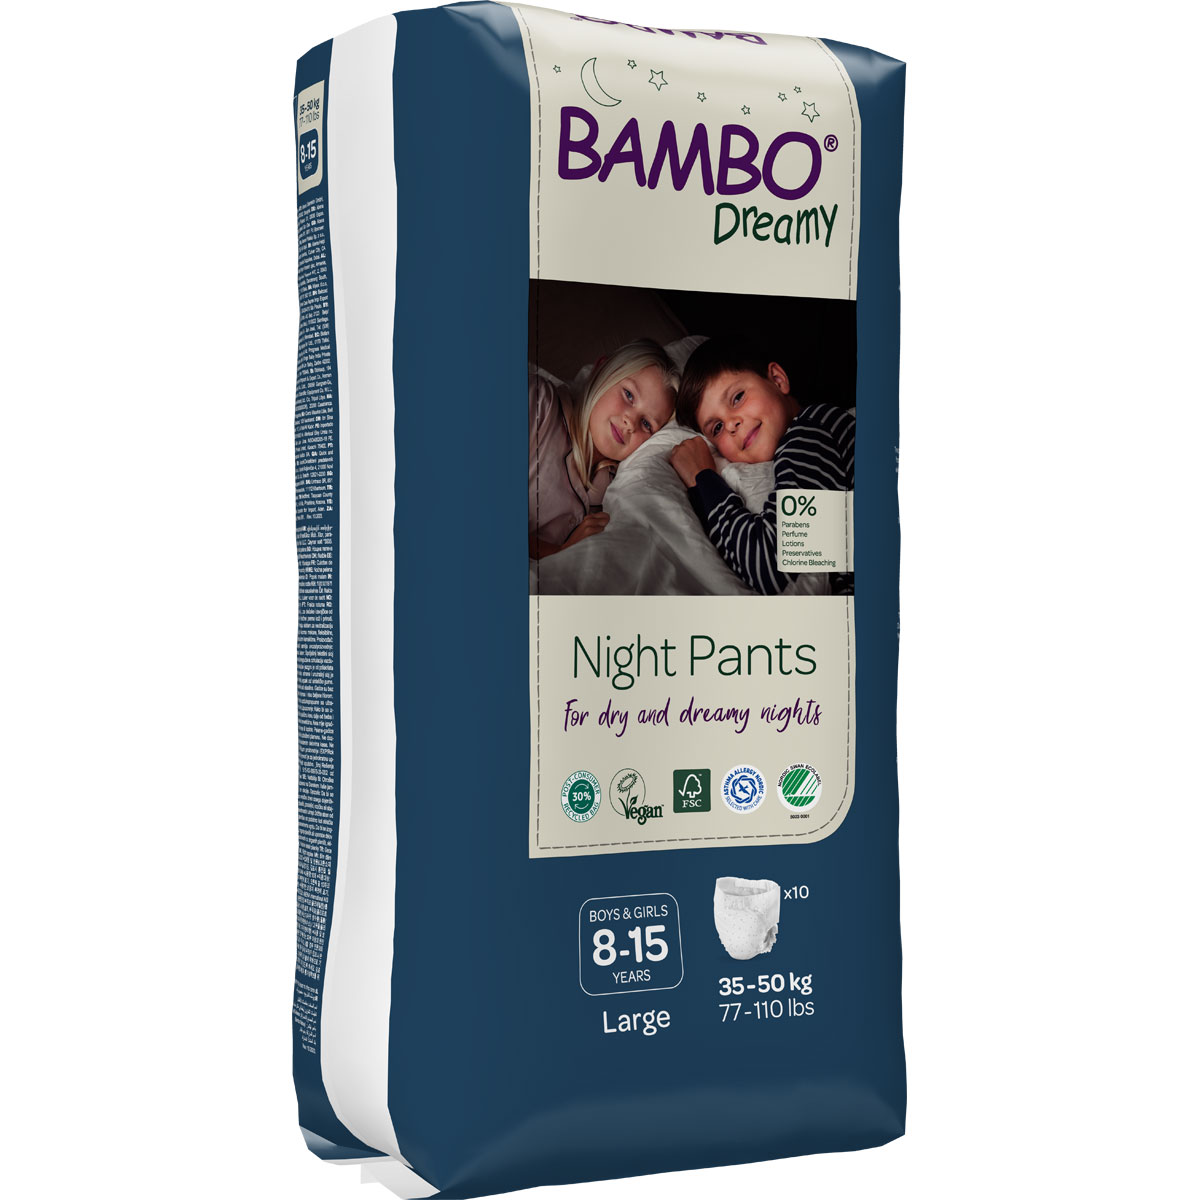 Bambo Dreamy - Night Pants unisex - 8 bis 15 Jahre (35-50 kg) - 10 St. Pack